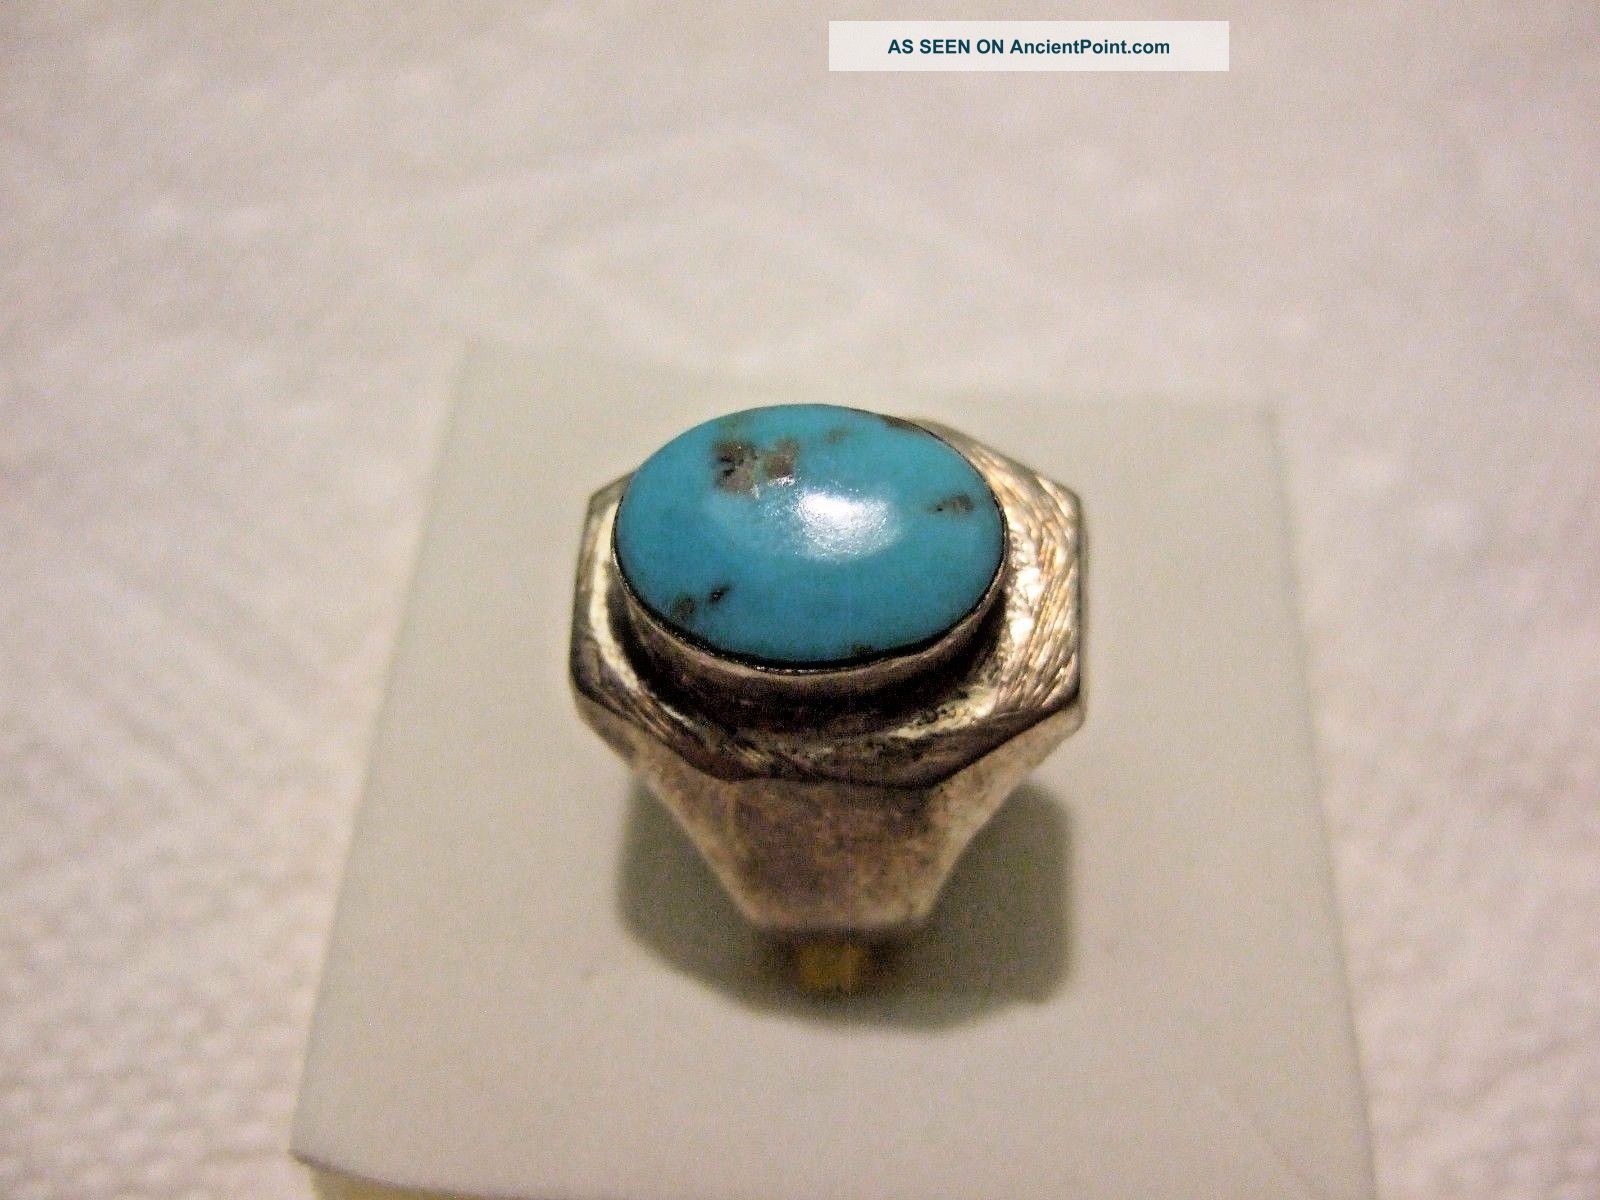 Vintage Islamic Middle Eastern Tribal Ethnic Natural Turquoise Ring خاتم اسلامي Islamic photo